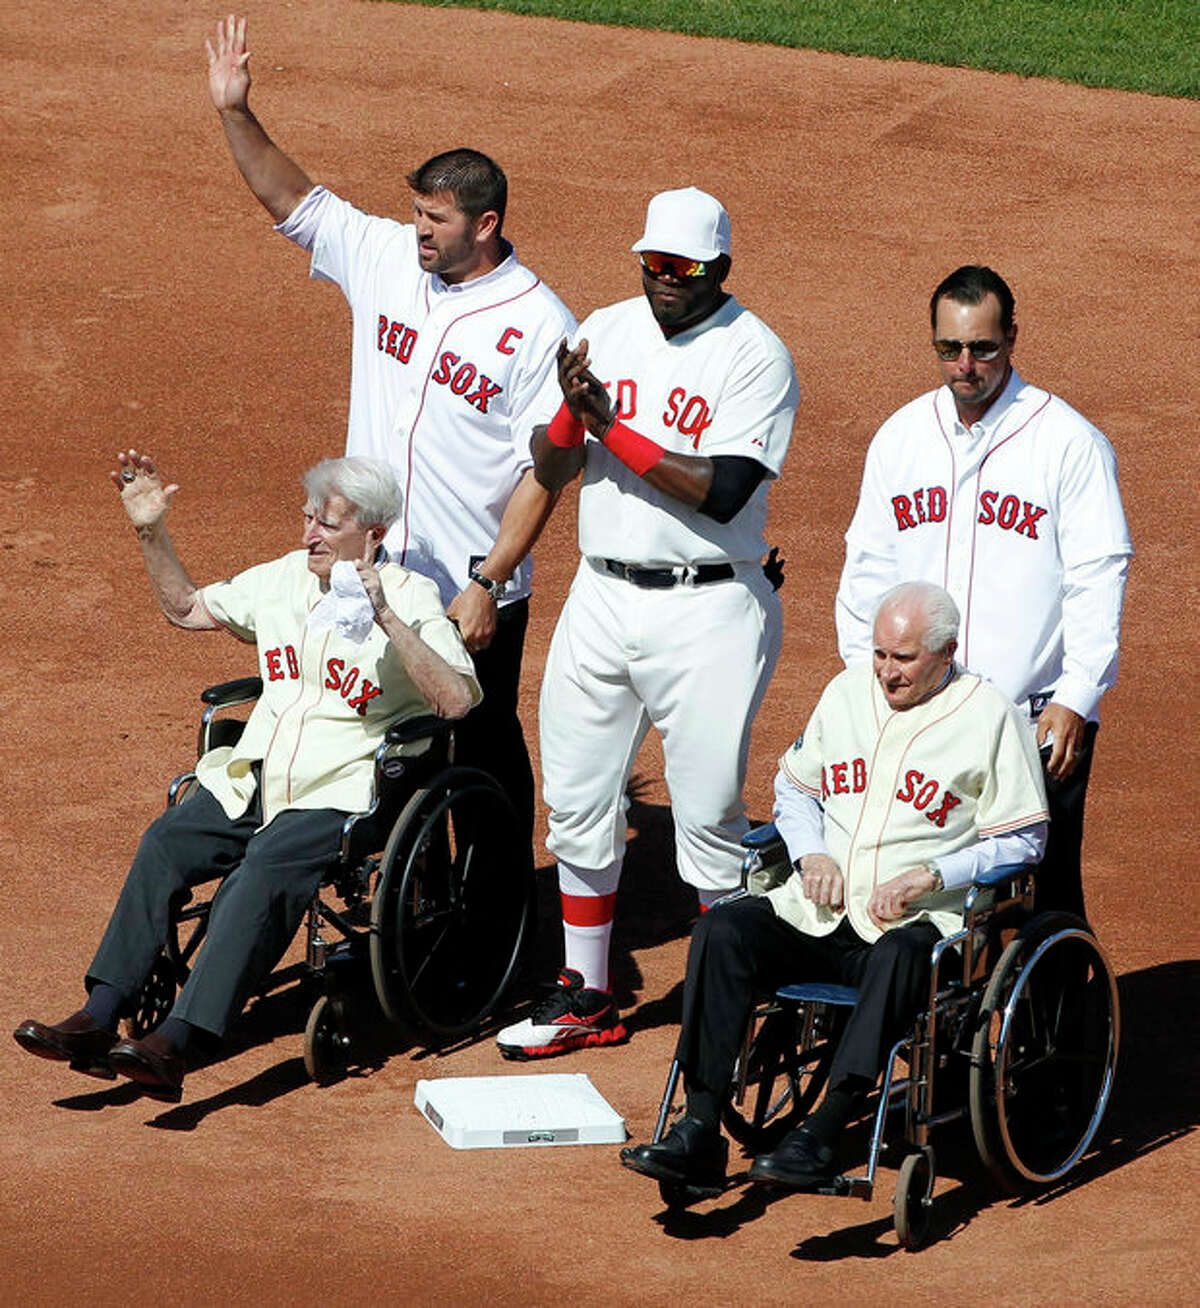 Former Boston Red Sox catcher Jason Varitek, top left, stands with, current designated hitter David Ortiz, top center, former pitcher Tim Wakefield, top right, and former players Bobby Doerr, seated right, and Johnny Pesky, seated left, on the field during ceremonies to celebrate the 100th anniversary of a regular season baseball game at Fenway Park before the game between the New York Yankees and the Red Sox in Boston, Friday, April 20, 2012. (AP Photo/Michael Dwyer)